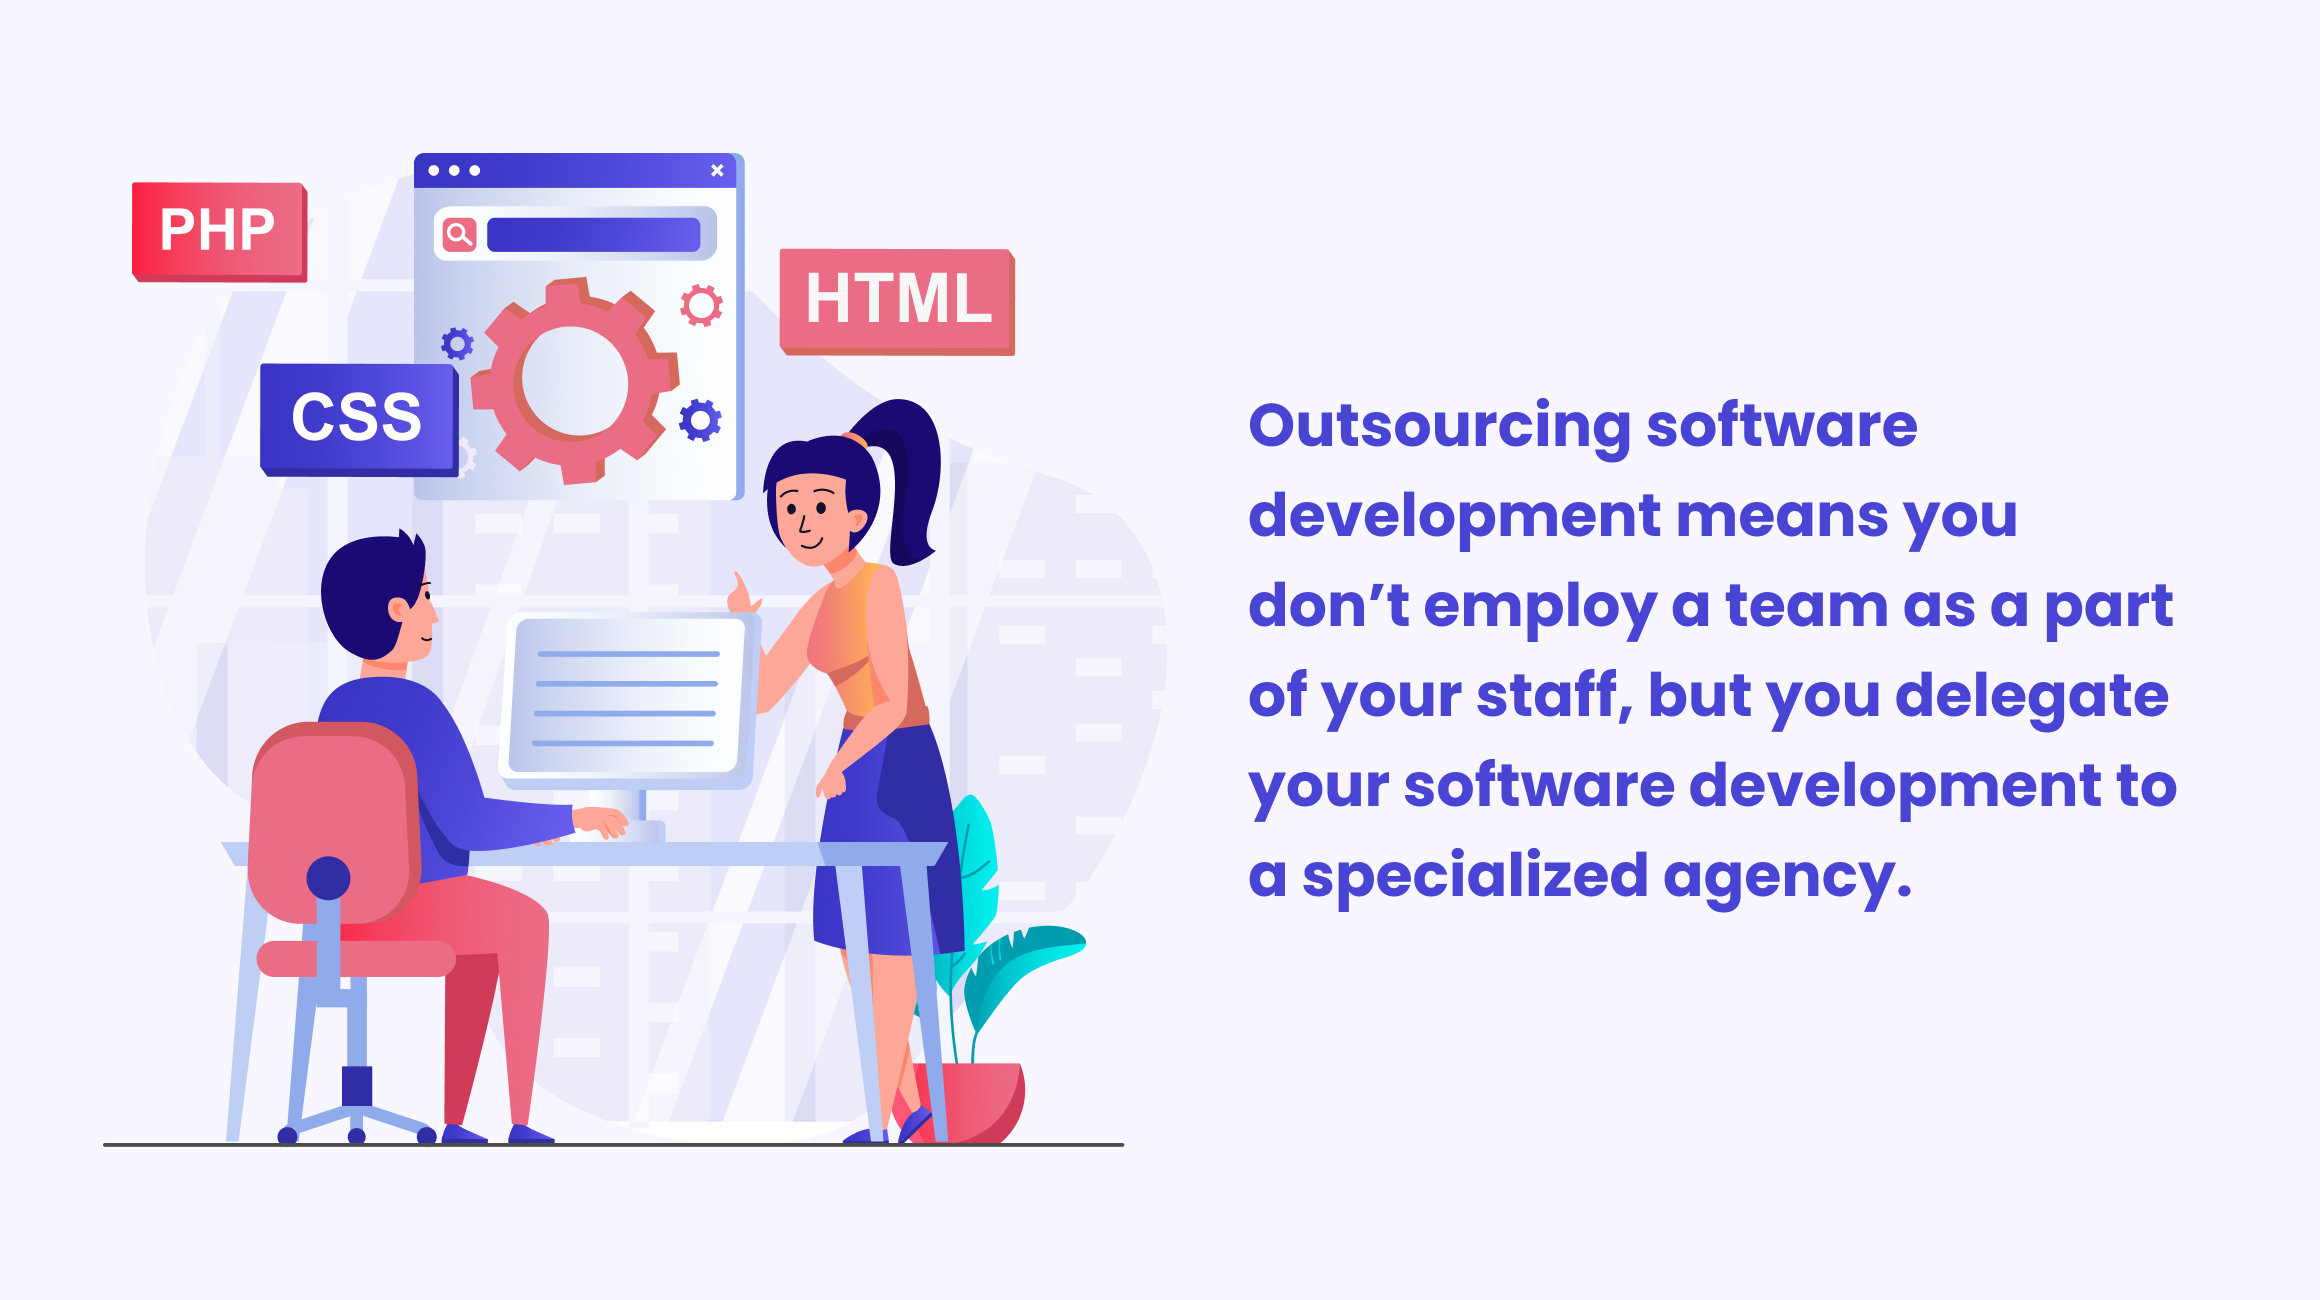 What is outsourcing software development